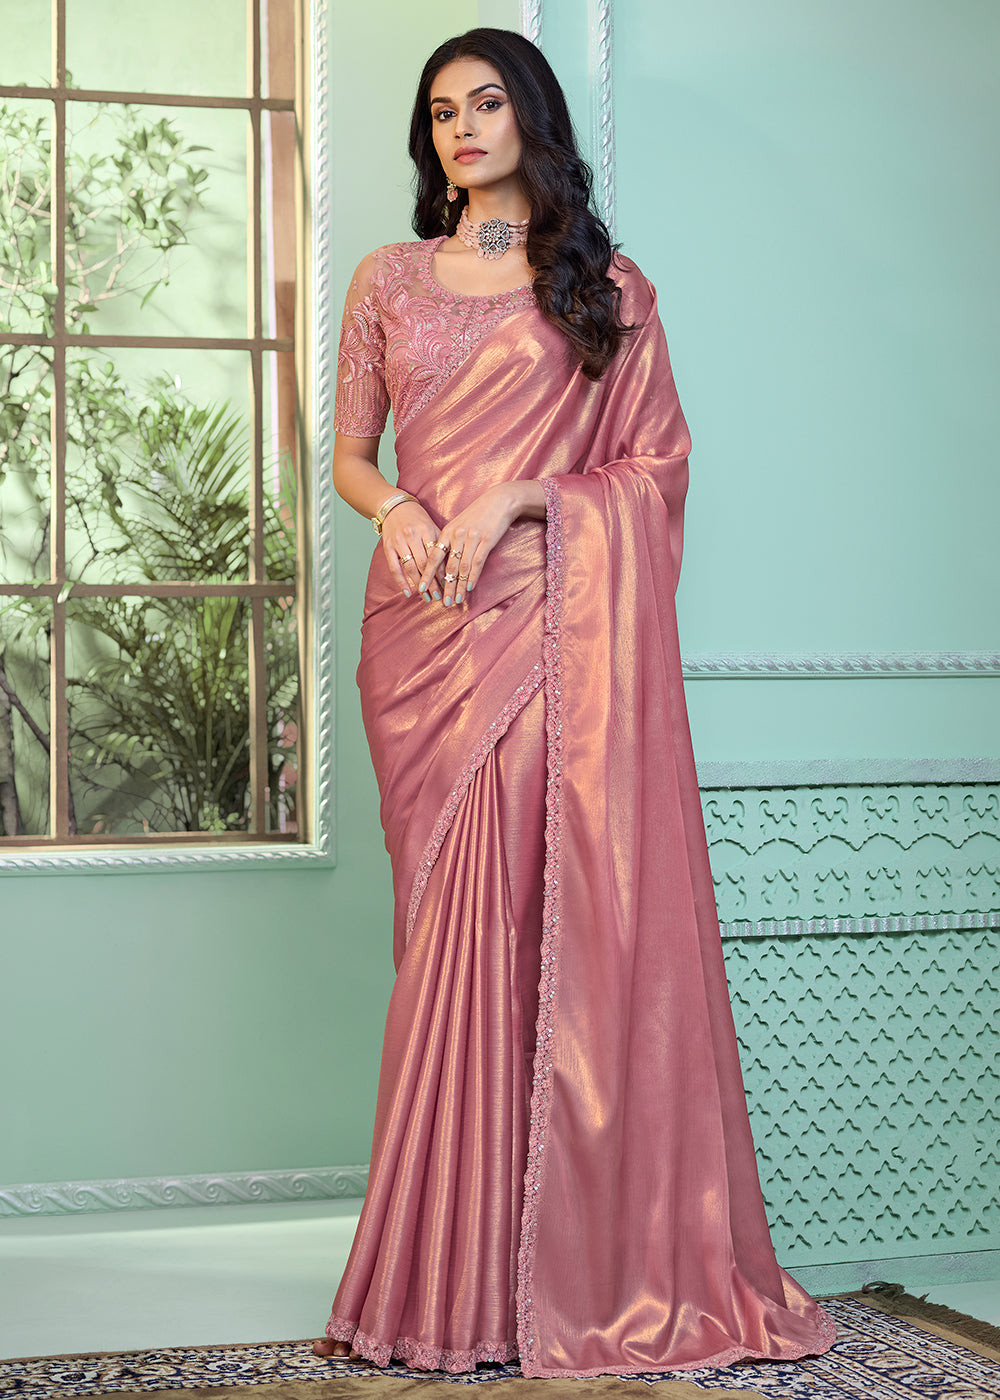 Buy Now Two Tone Pink Embroidered Wedding Party Wear Saree Online in USA, UK, Canada & Worldwide at Empress Clothing. 